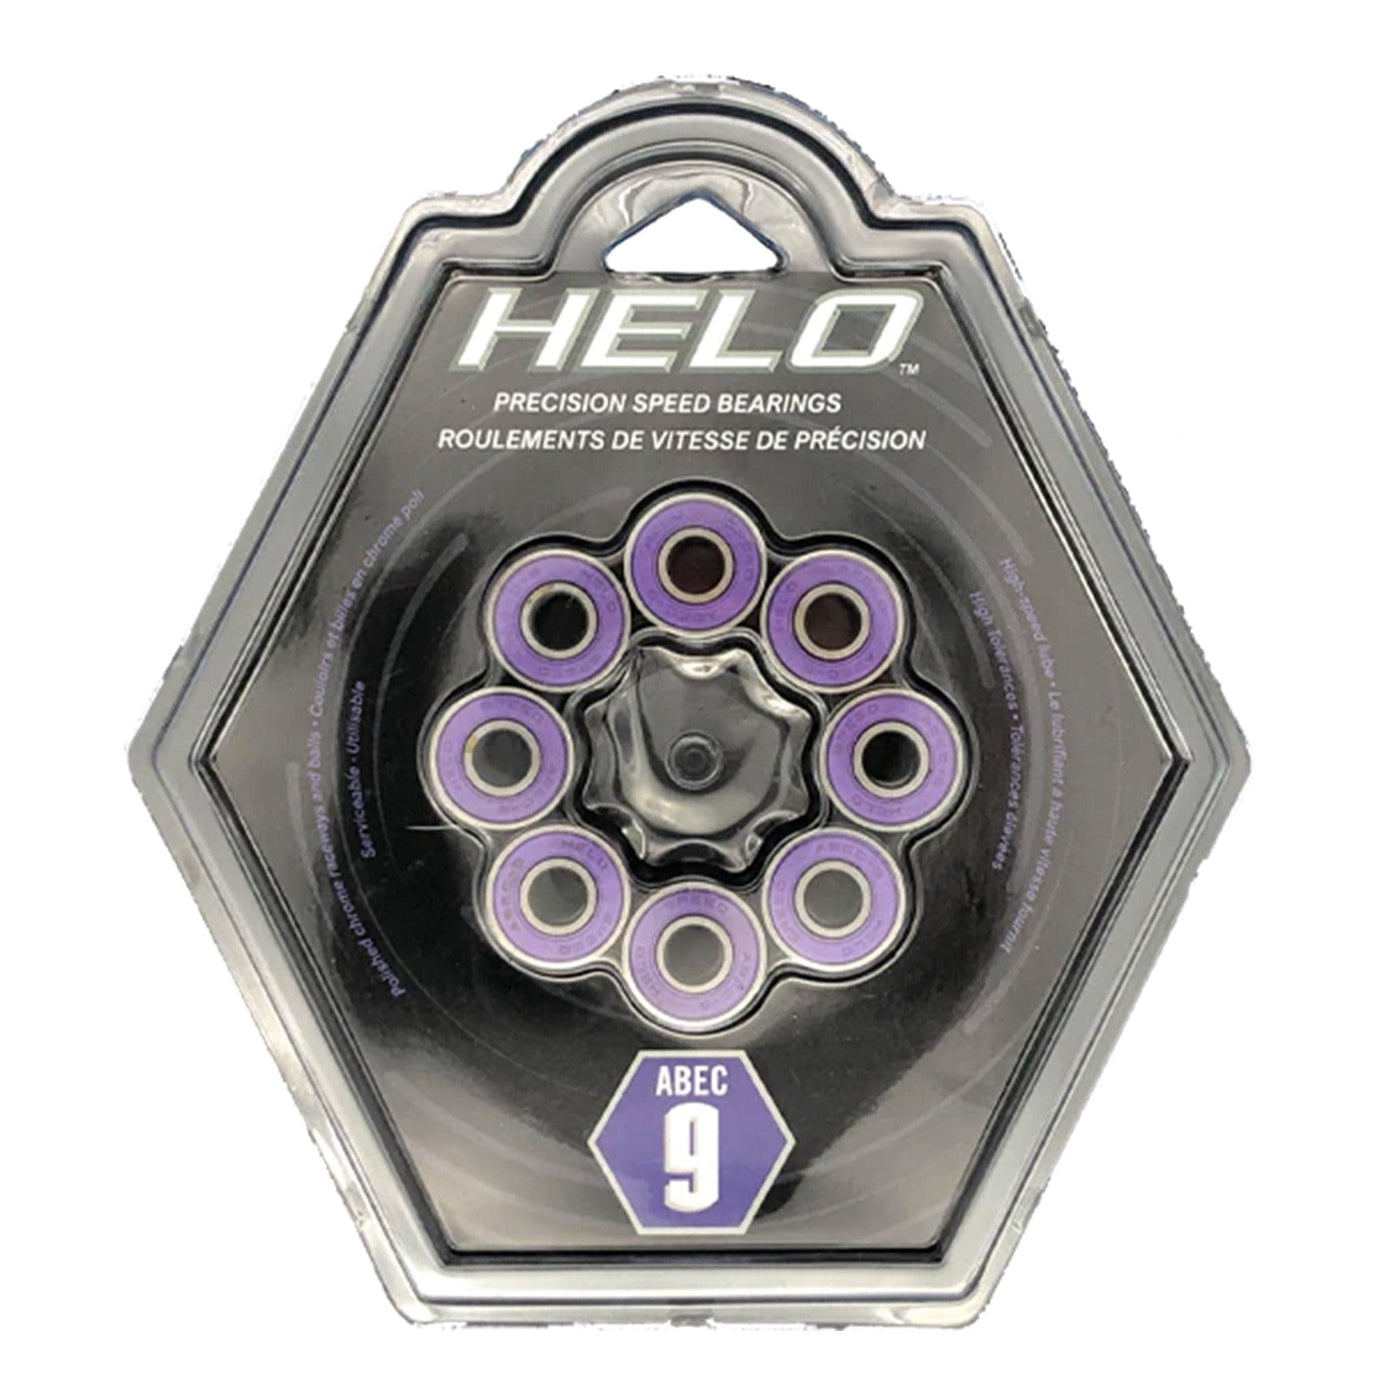 Helo Speed Bearing Abec 9 - The Hockey Shop Source For Sports